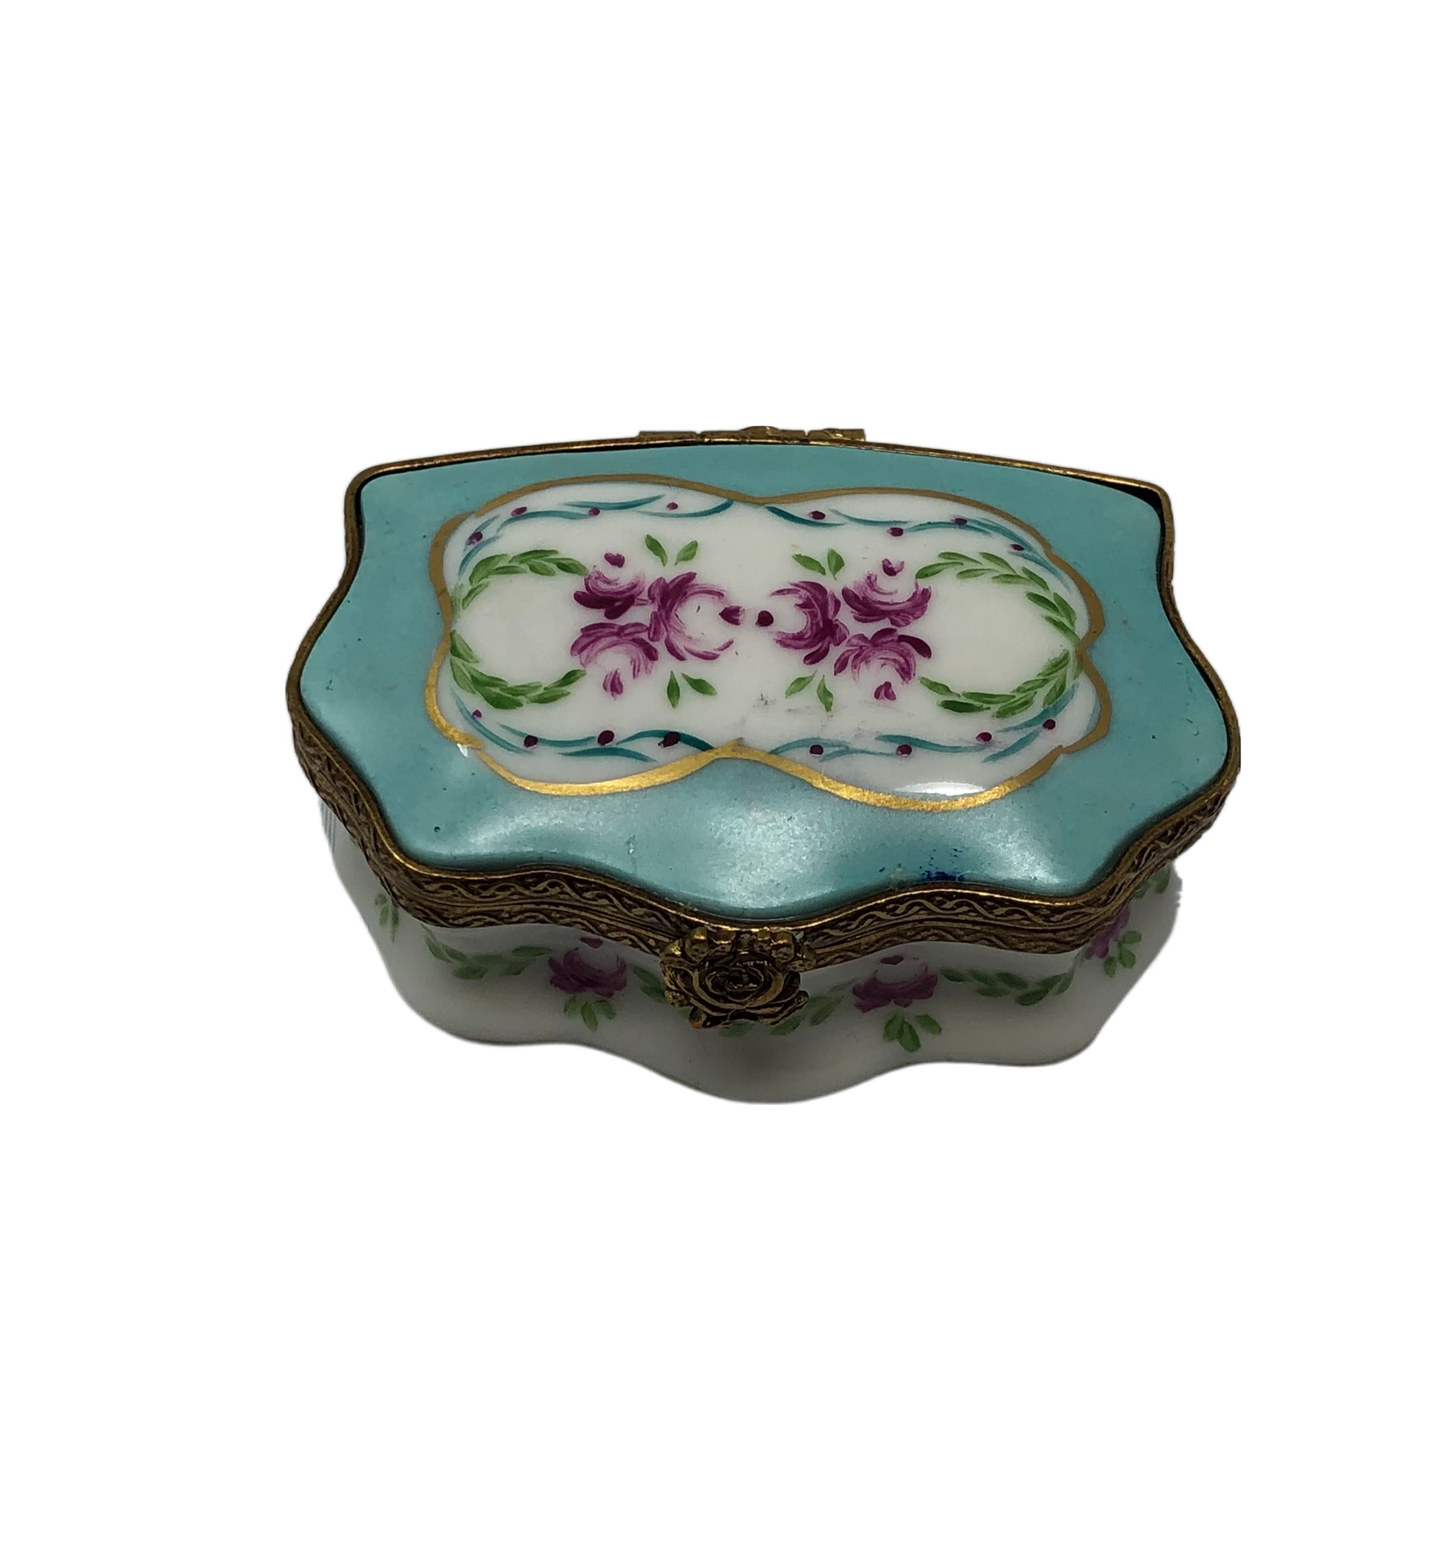 Floral Bliss - Limoges Box: Hand-Painted Blue Flower Organic Box